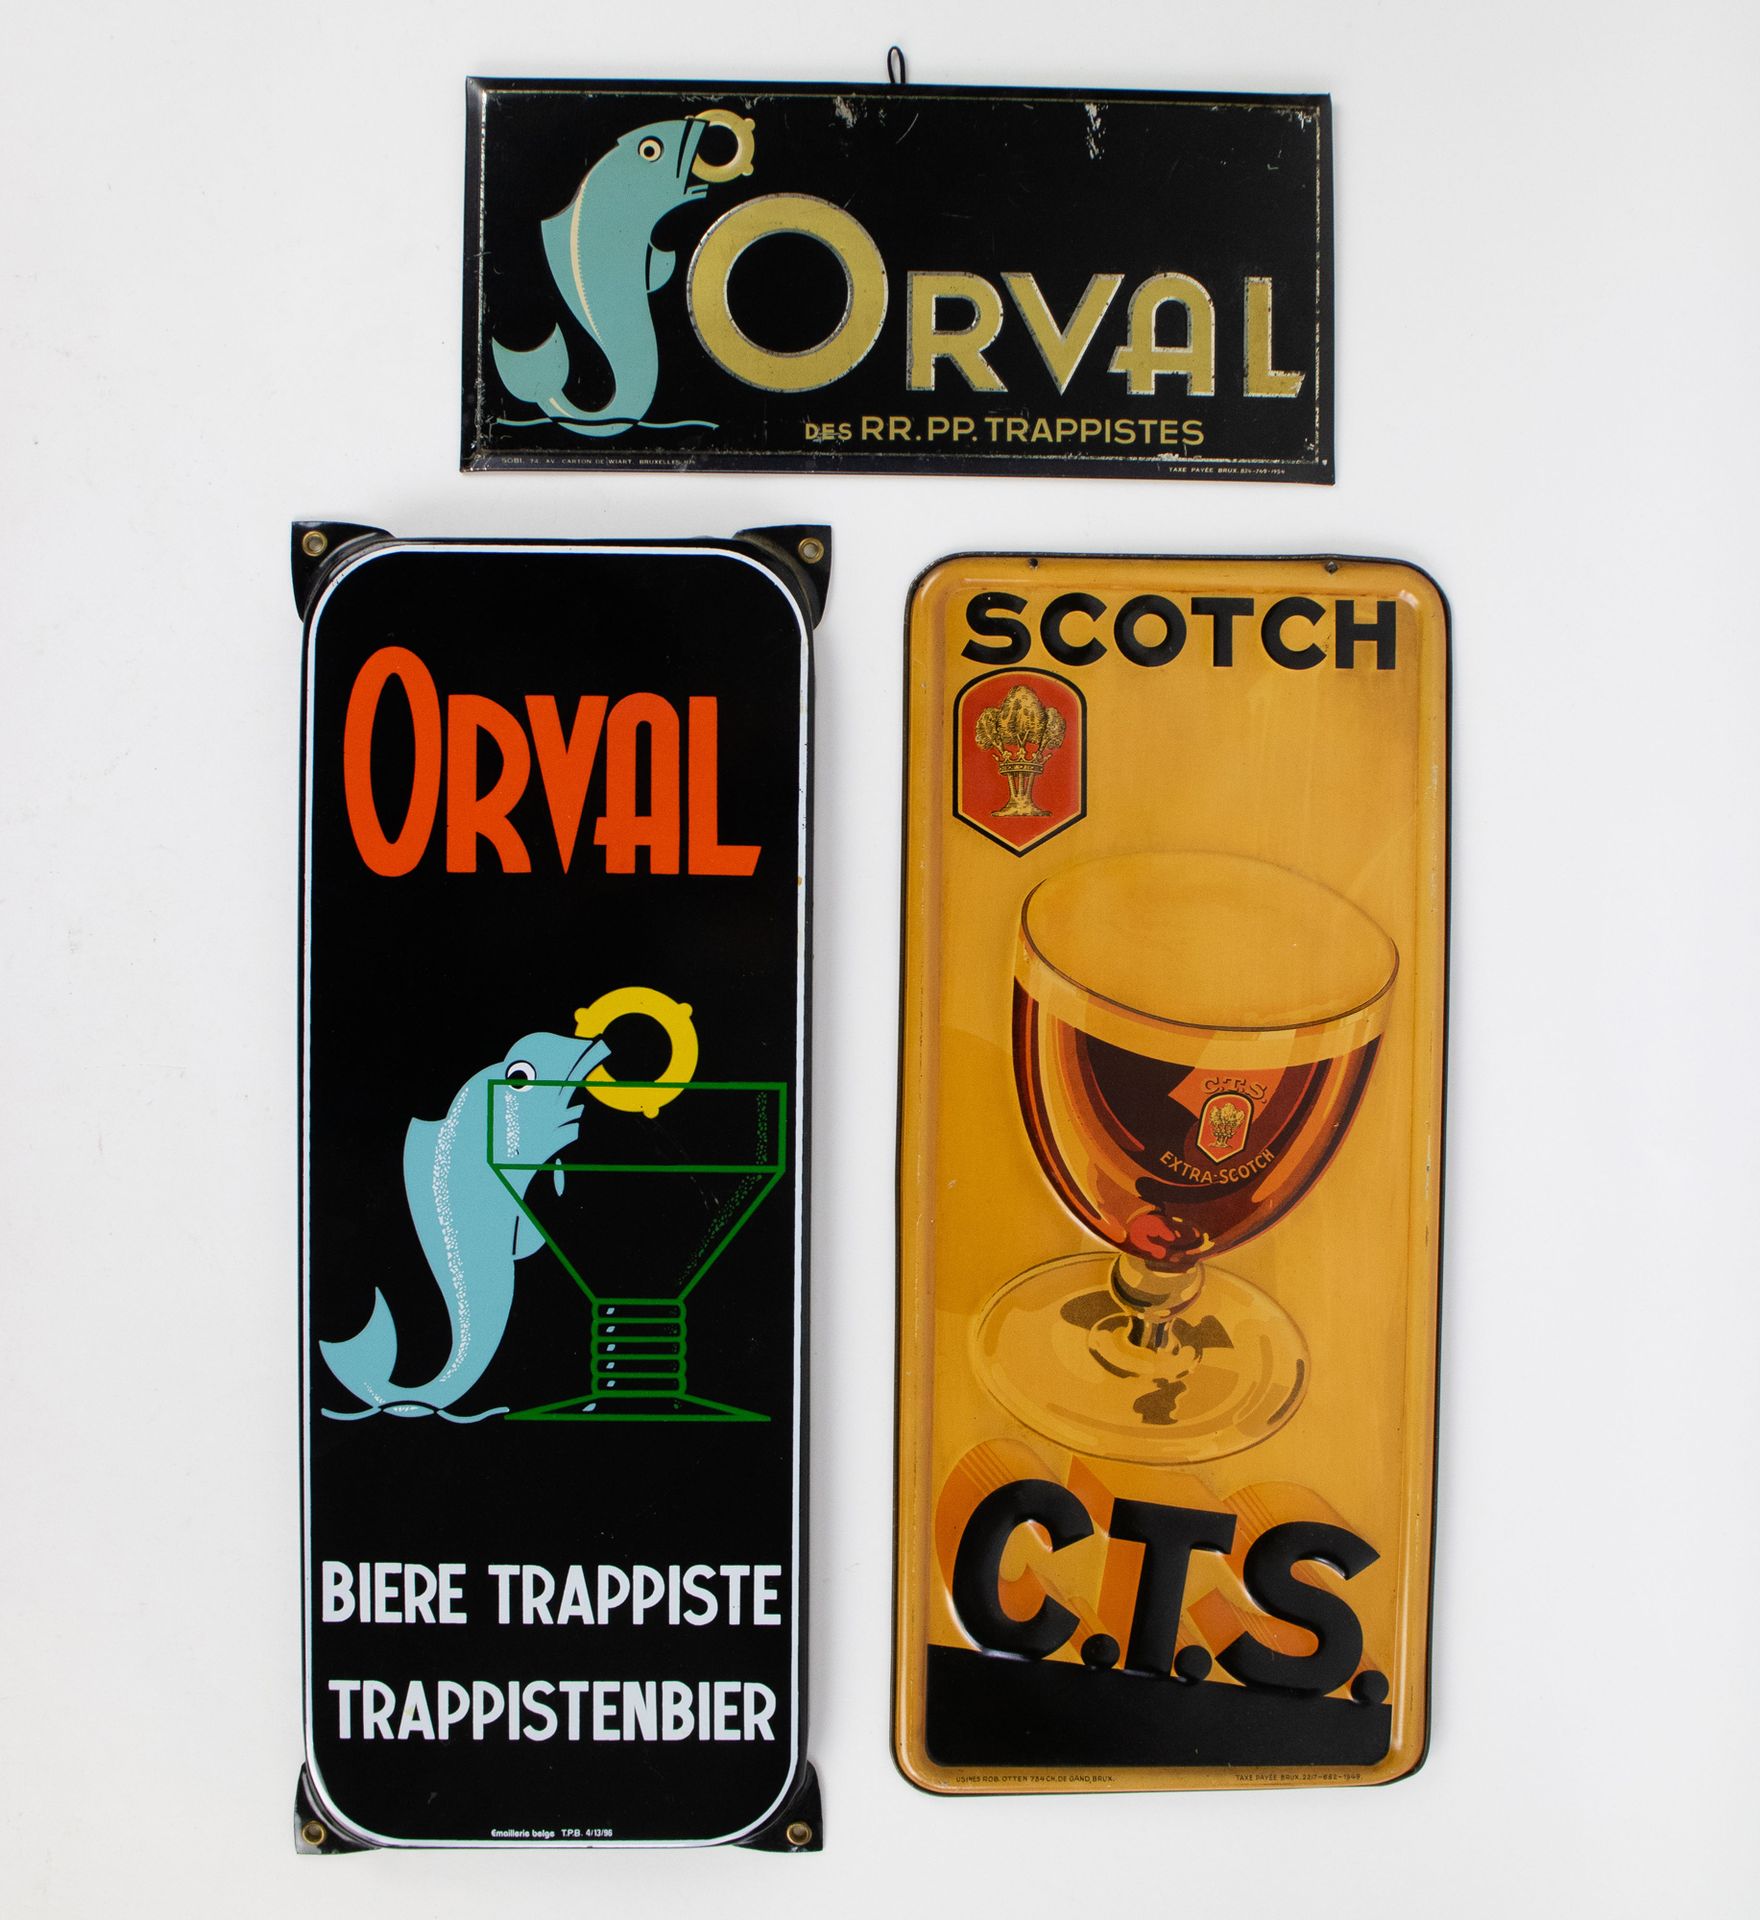 Null Metal Orval 1954, Scotch C.T.S. 1949 and Enamel ORVAL trappistenbier
Metal &hellip;